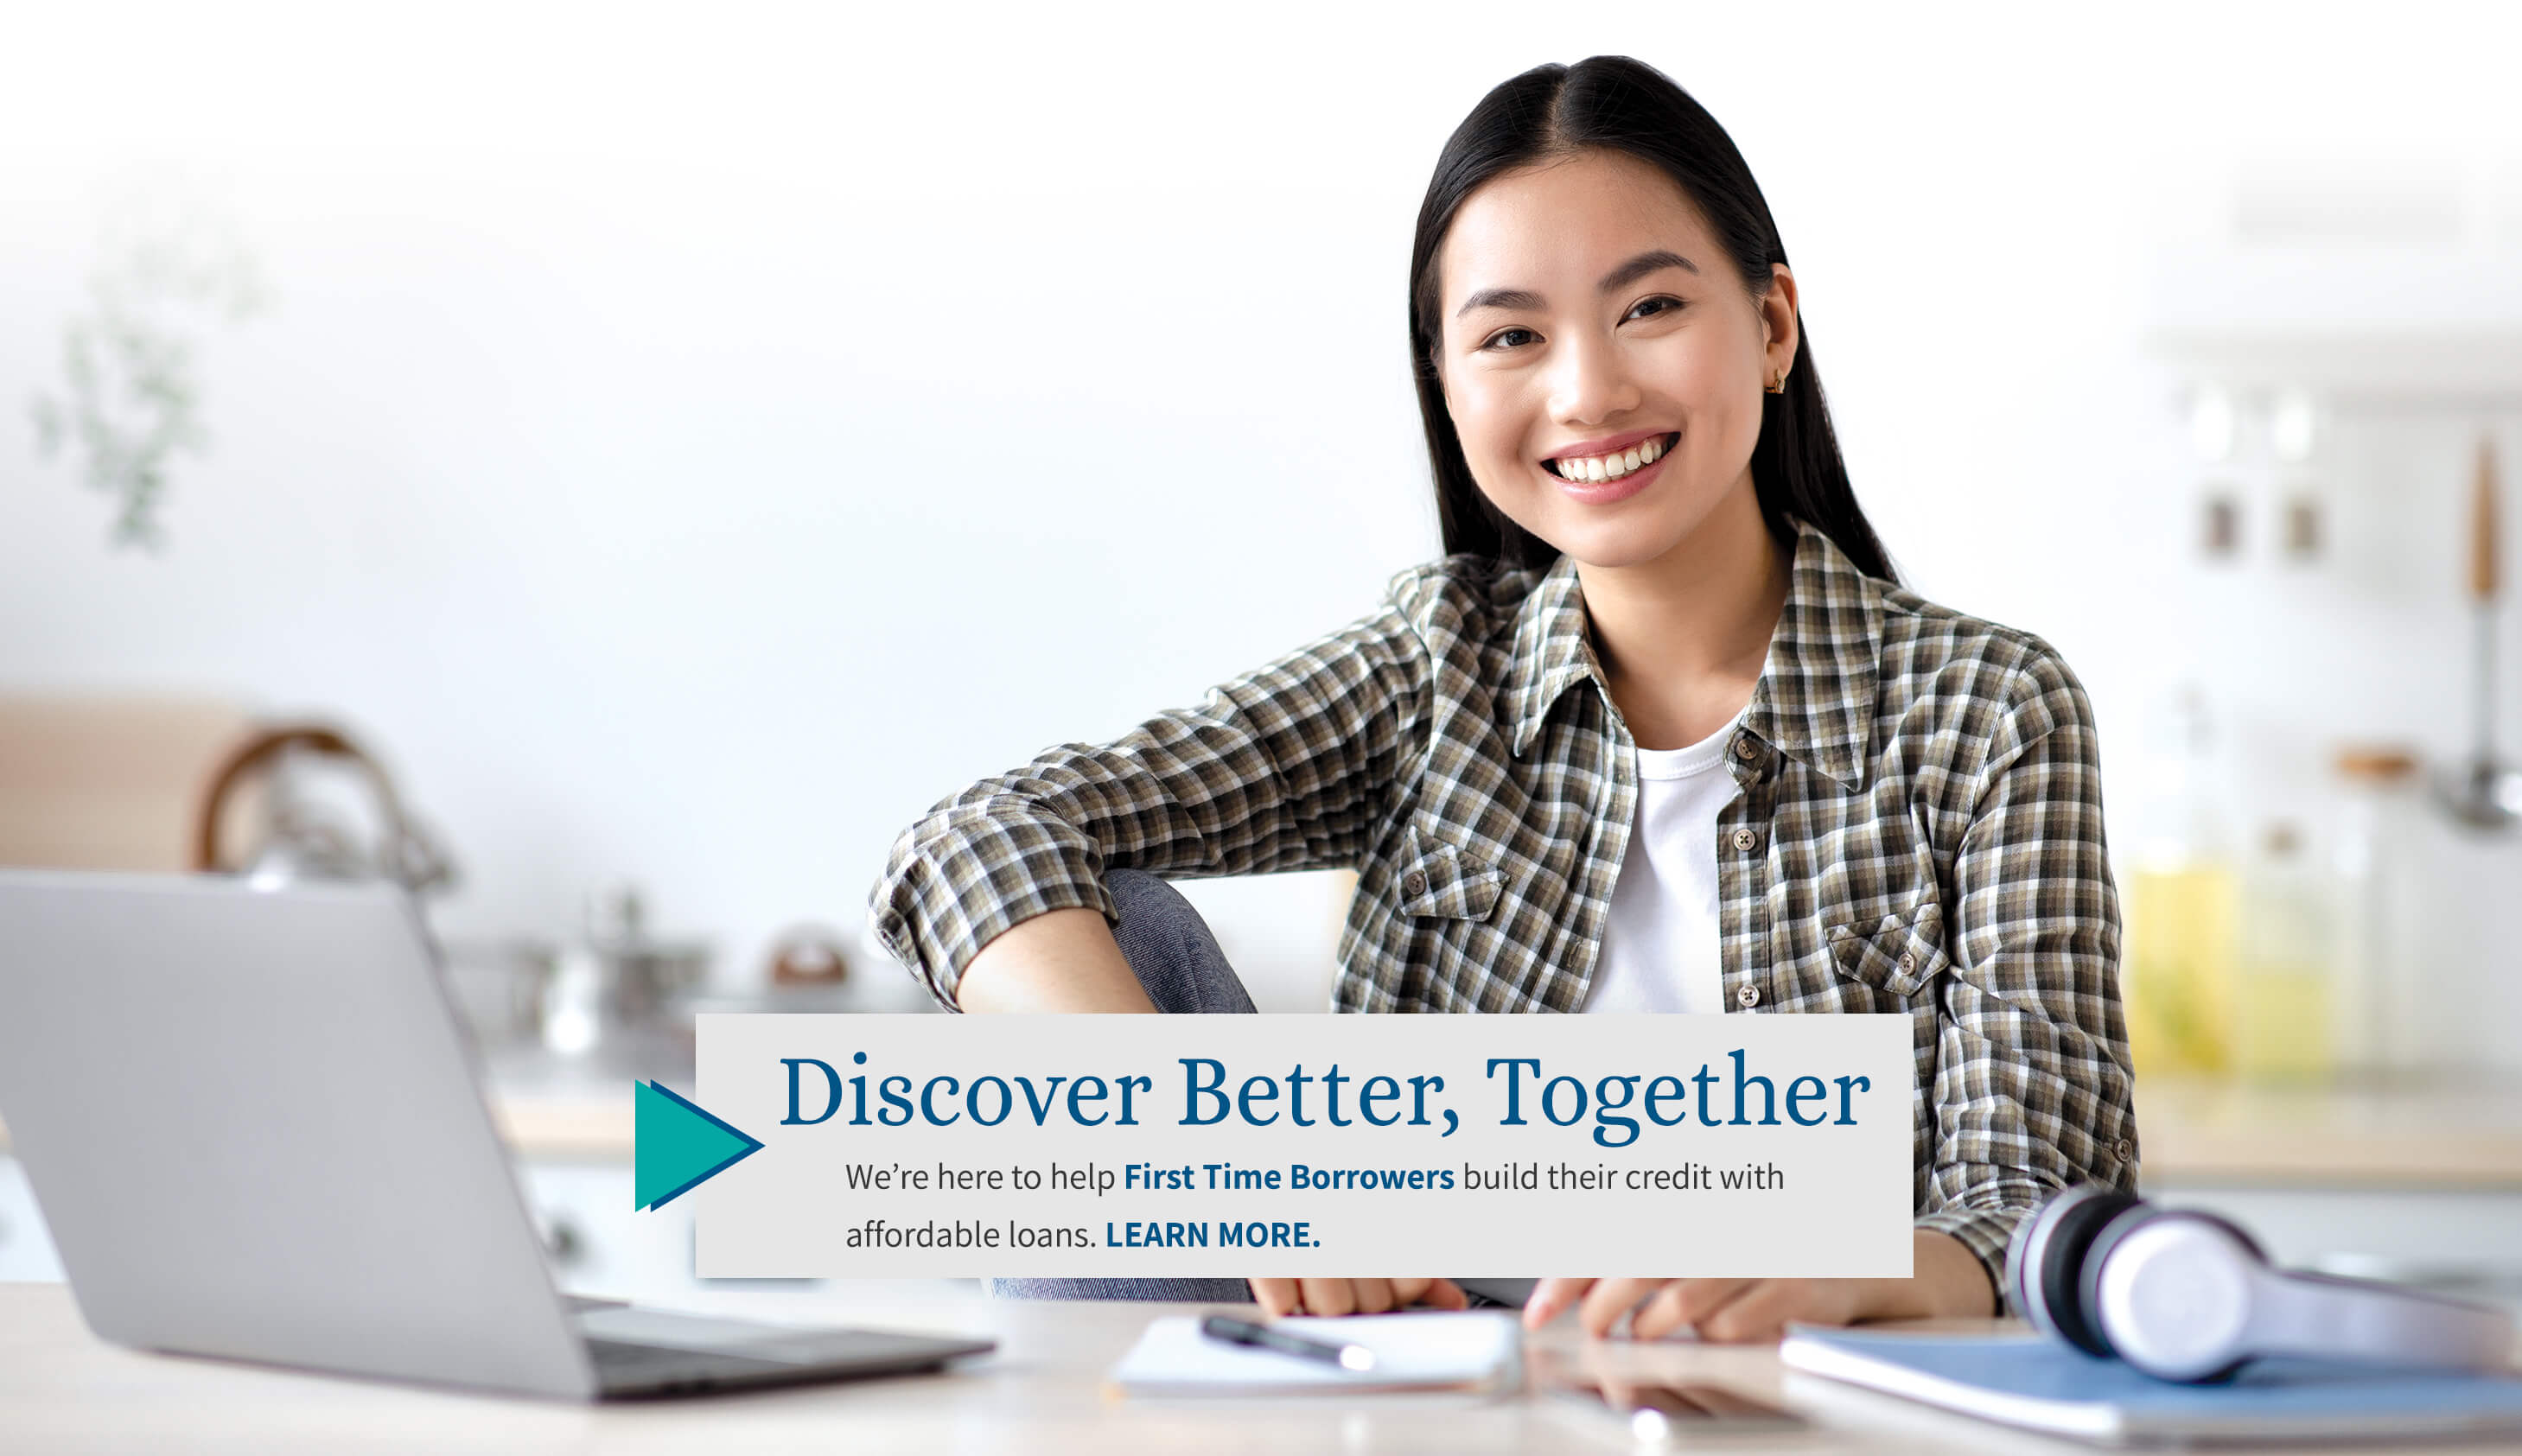 discover better, together we're here to help first time borrowers build their credit with affordable loans. learn more.